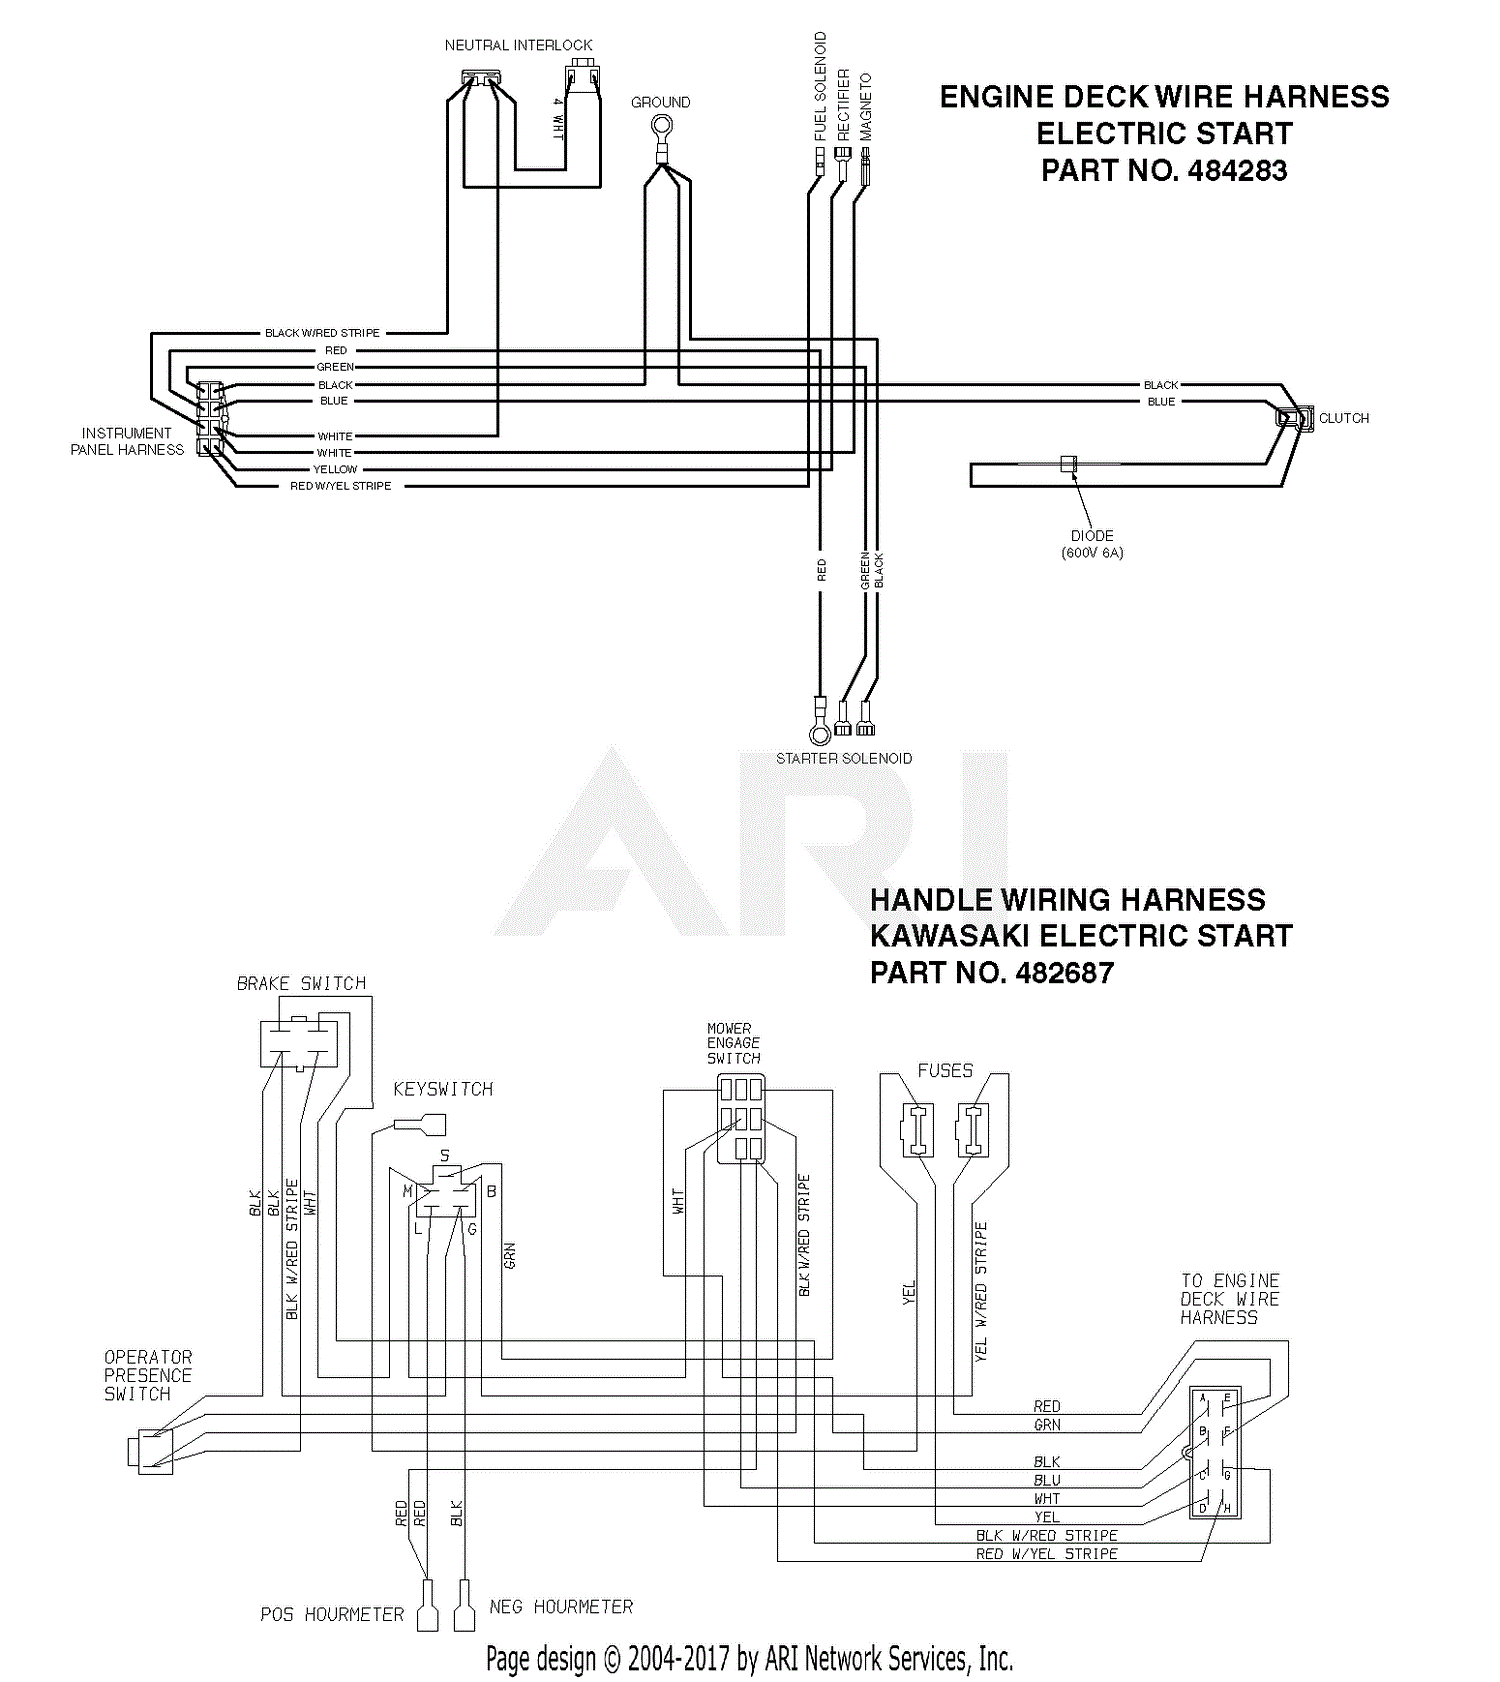 Engine Wiring Harness Bmw Schematic And Wiring Diagram Hot Sex Picture